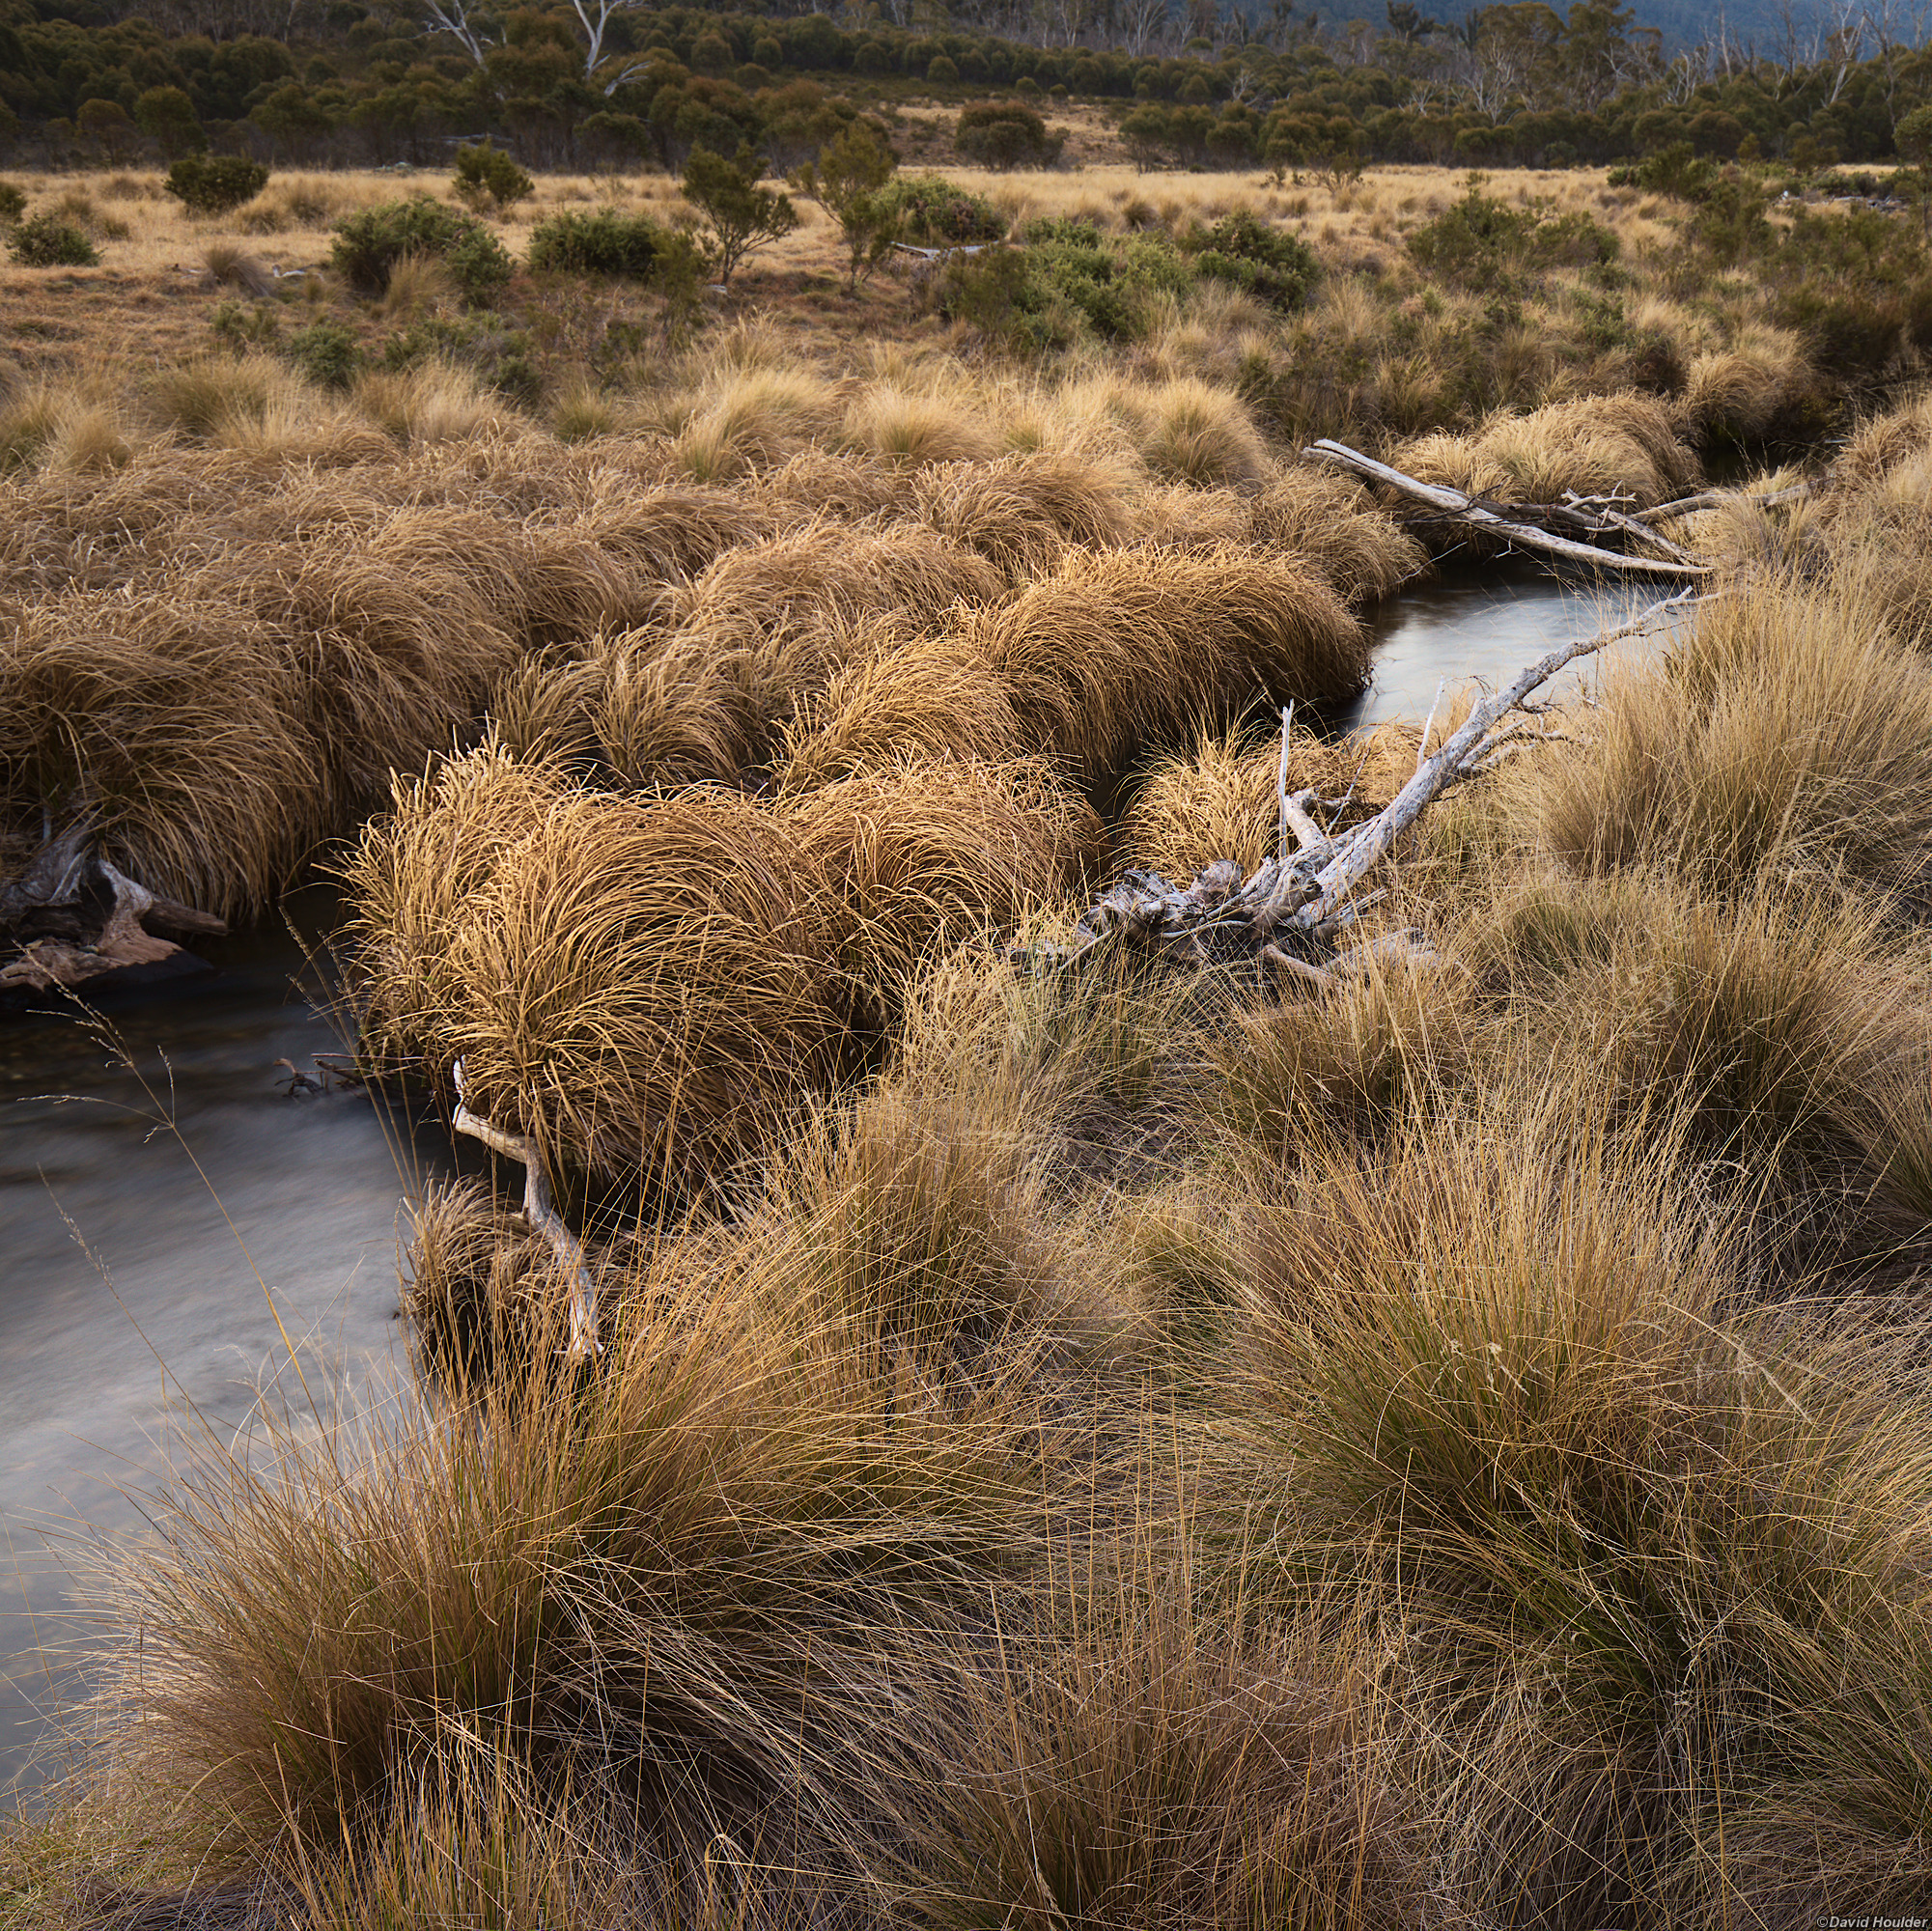 Stream flowing through grassland with dry tussocks in the foreground and several weathered logs